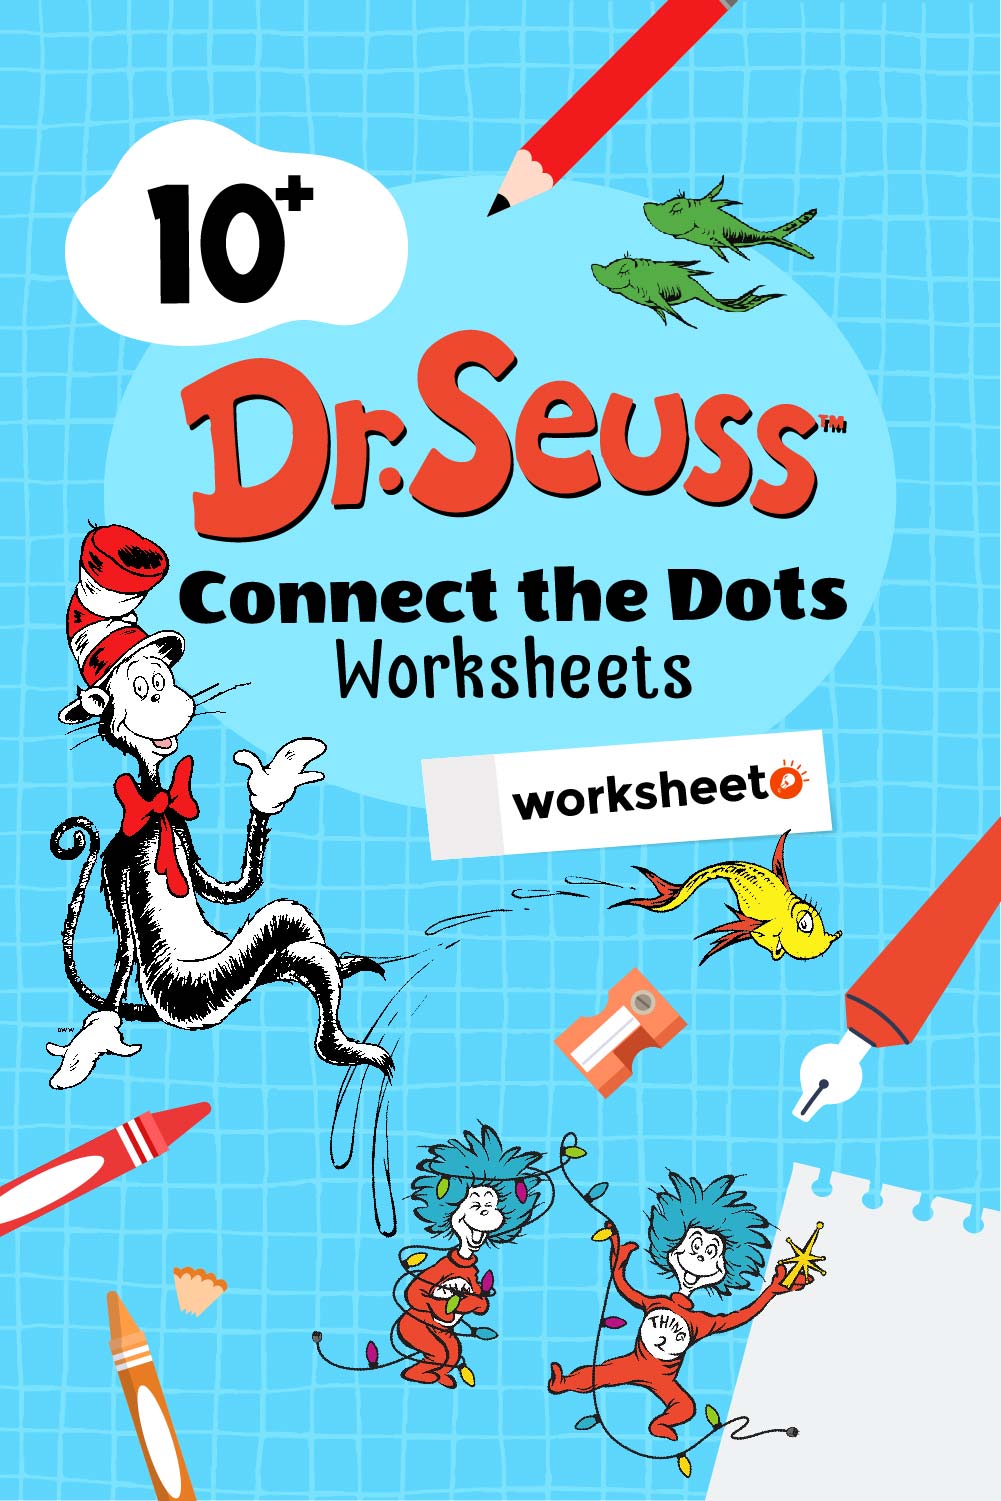 Dr. Seuss Connect the Dots Worksheets